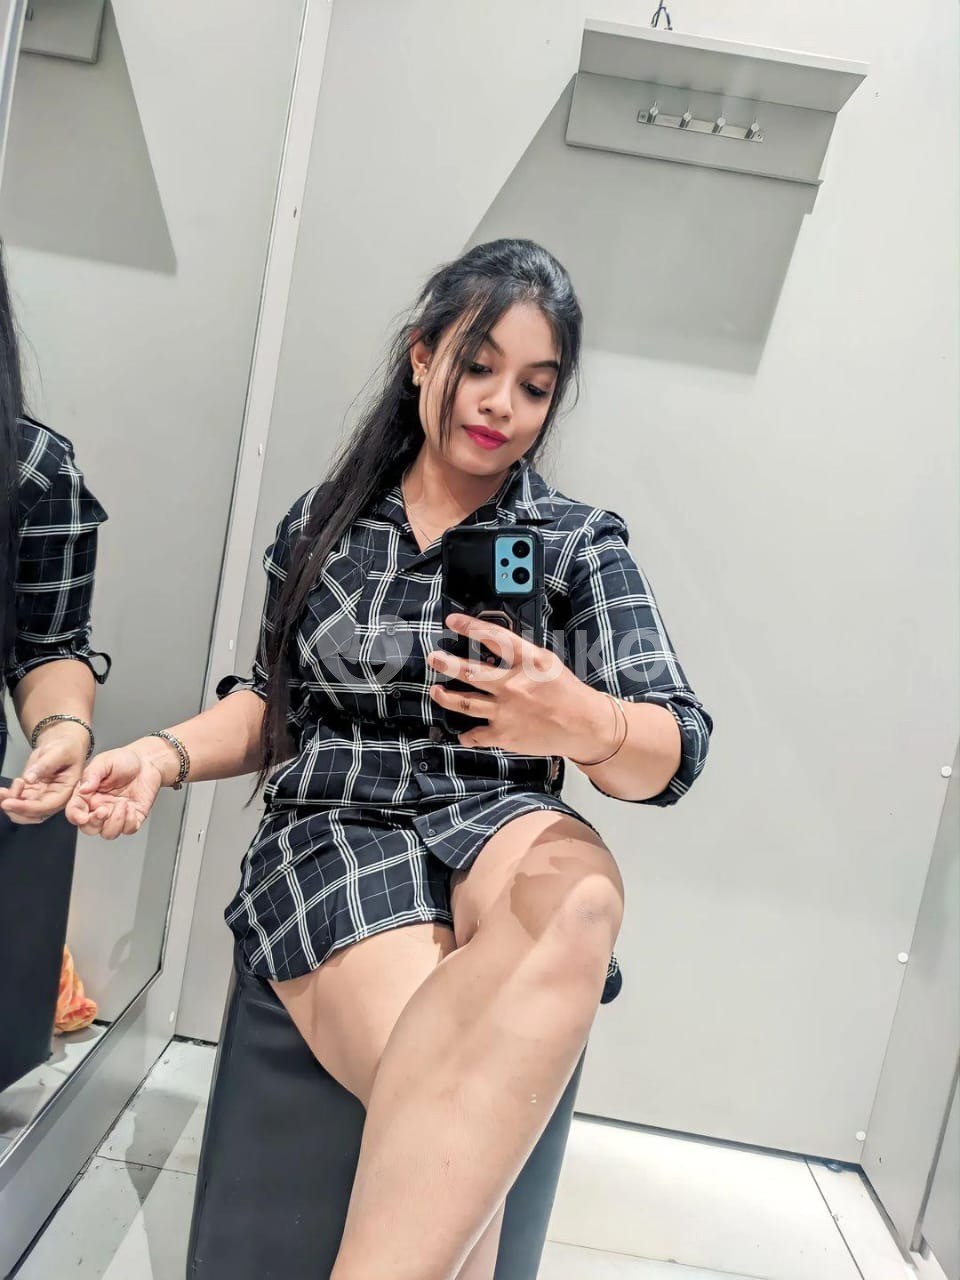 **$ CALL GIRLS IN❤️ BANGALORE ²⁴×⁷⏰ HOURS SERVICE AVAILABLE IN ANYTIME FUL**##